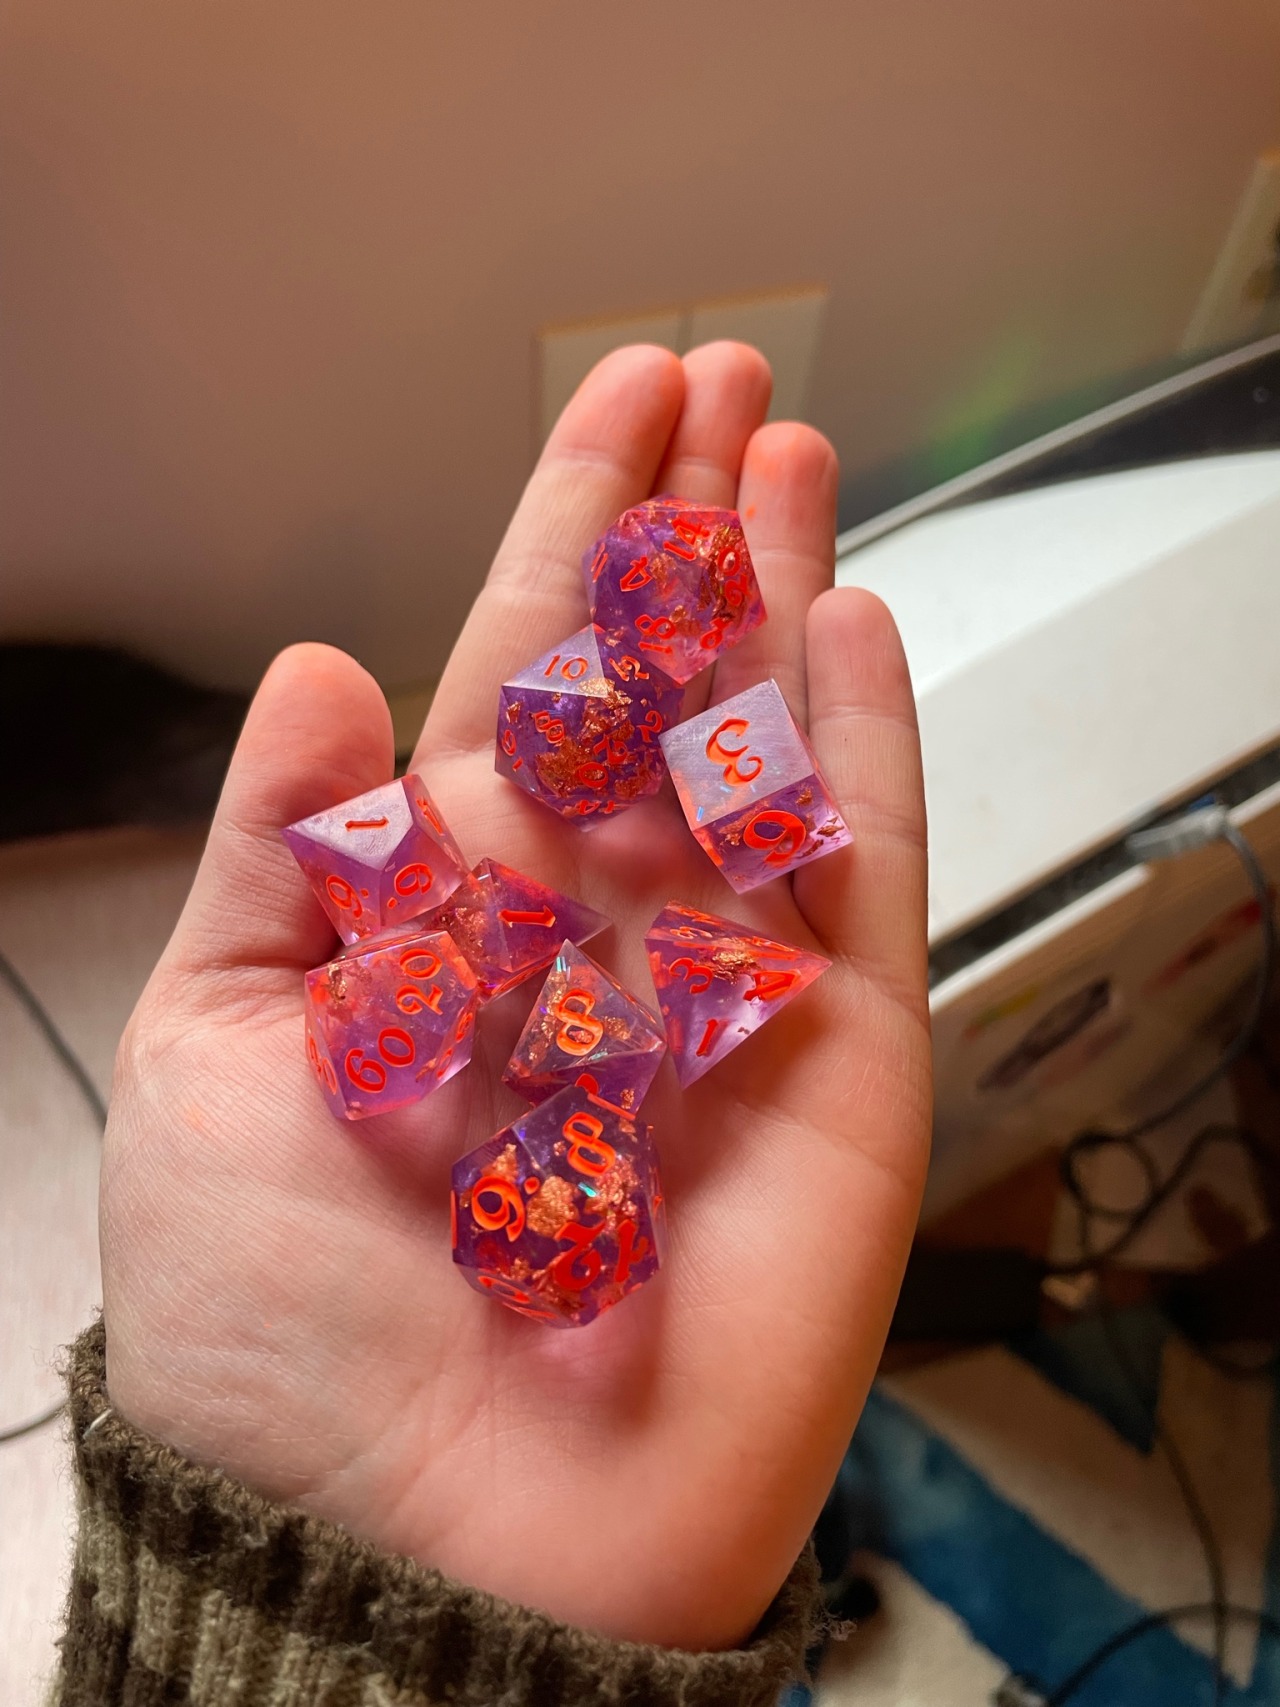 I made some dice for a friend for Christmas 🥰